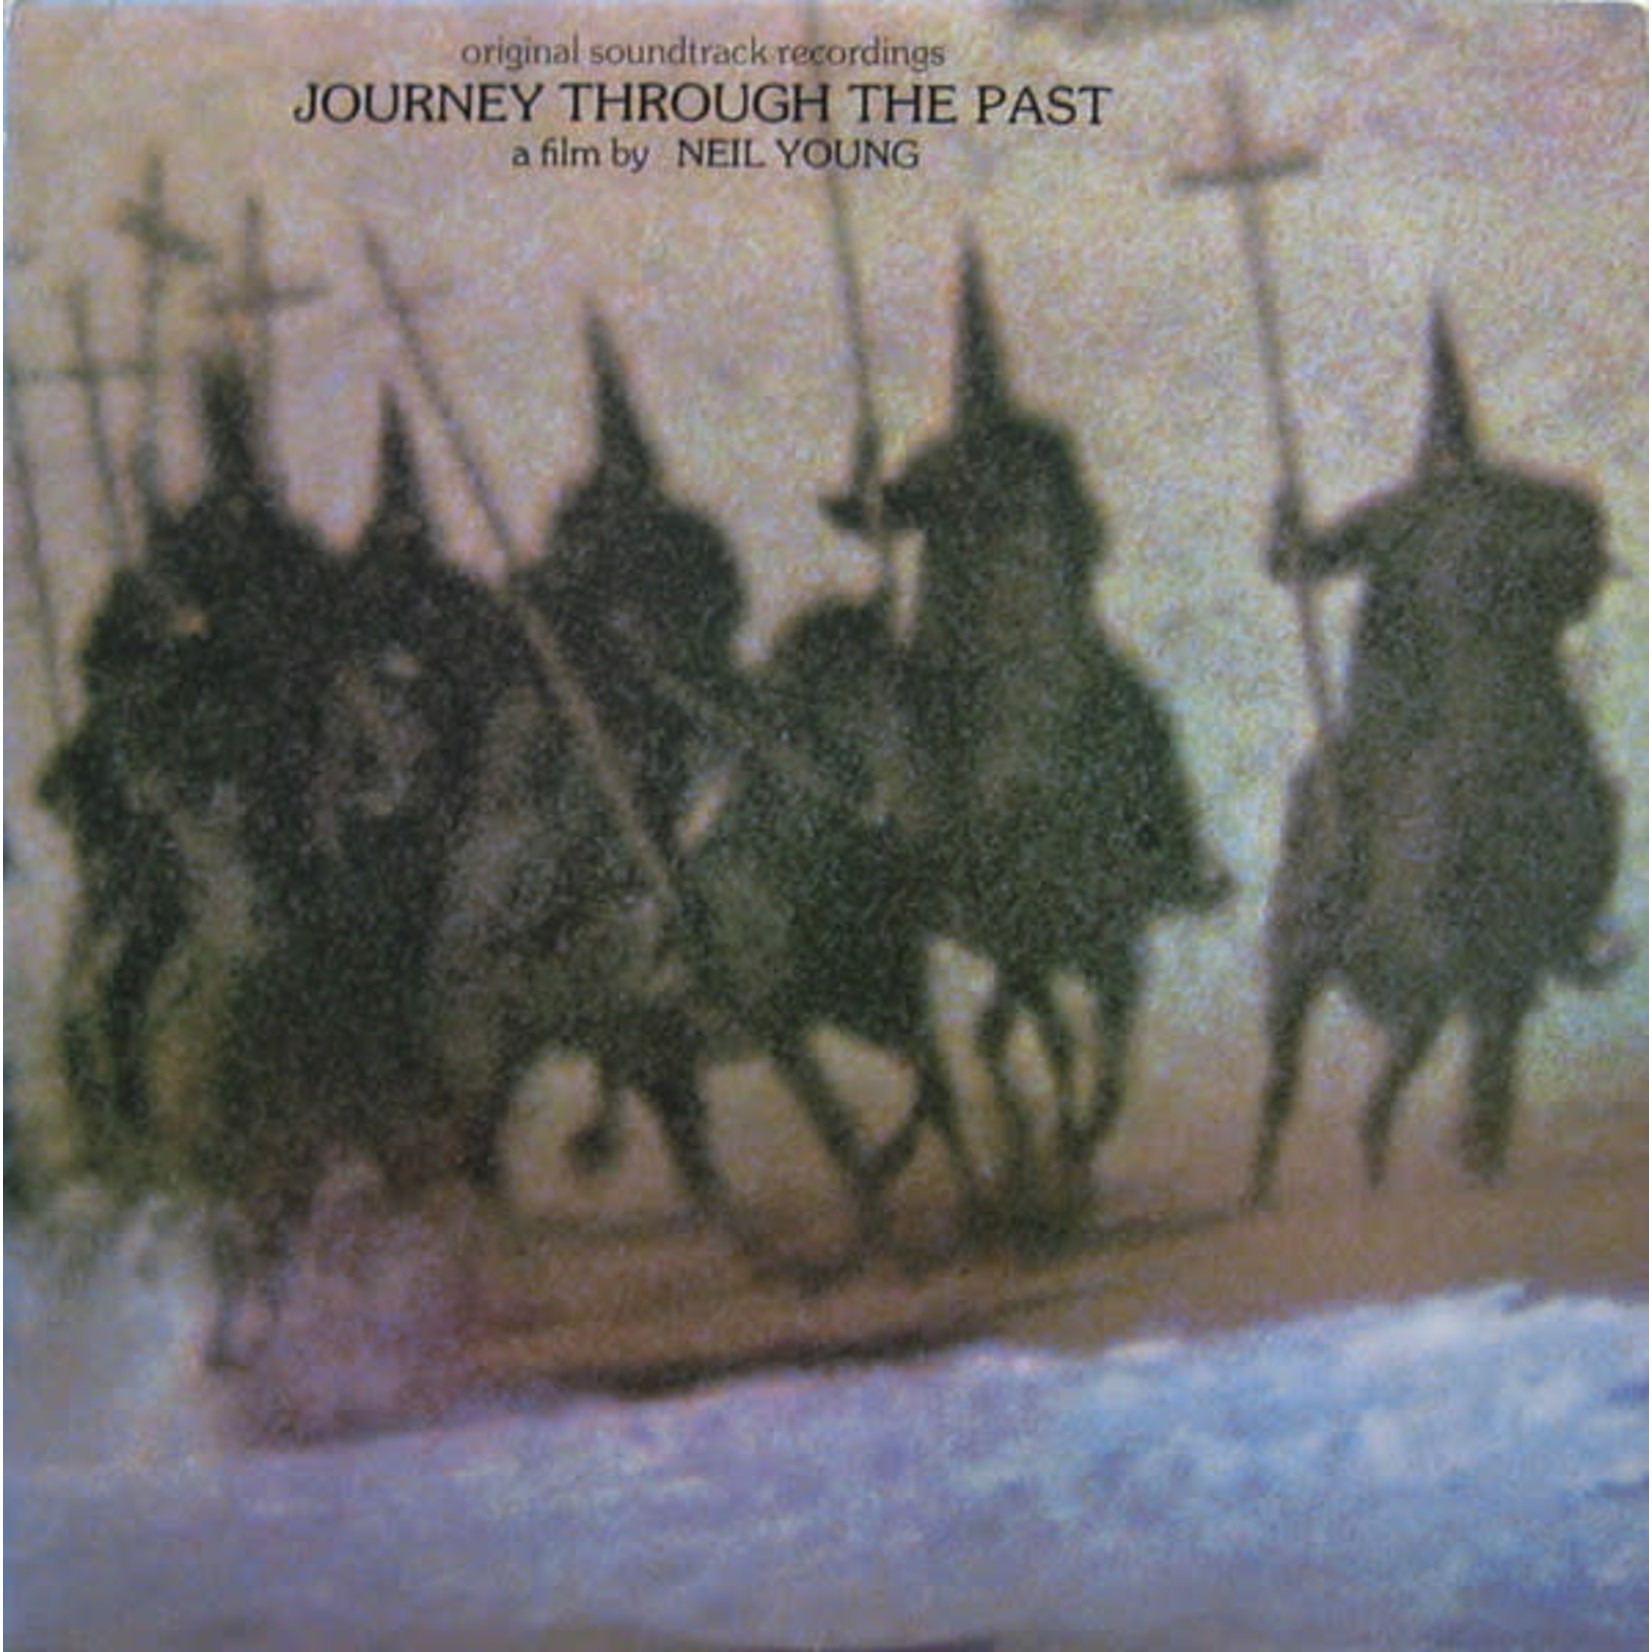 [Vintage] Neil Young - Journey Through the Past (soundtrack)